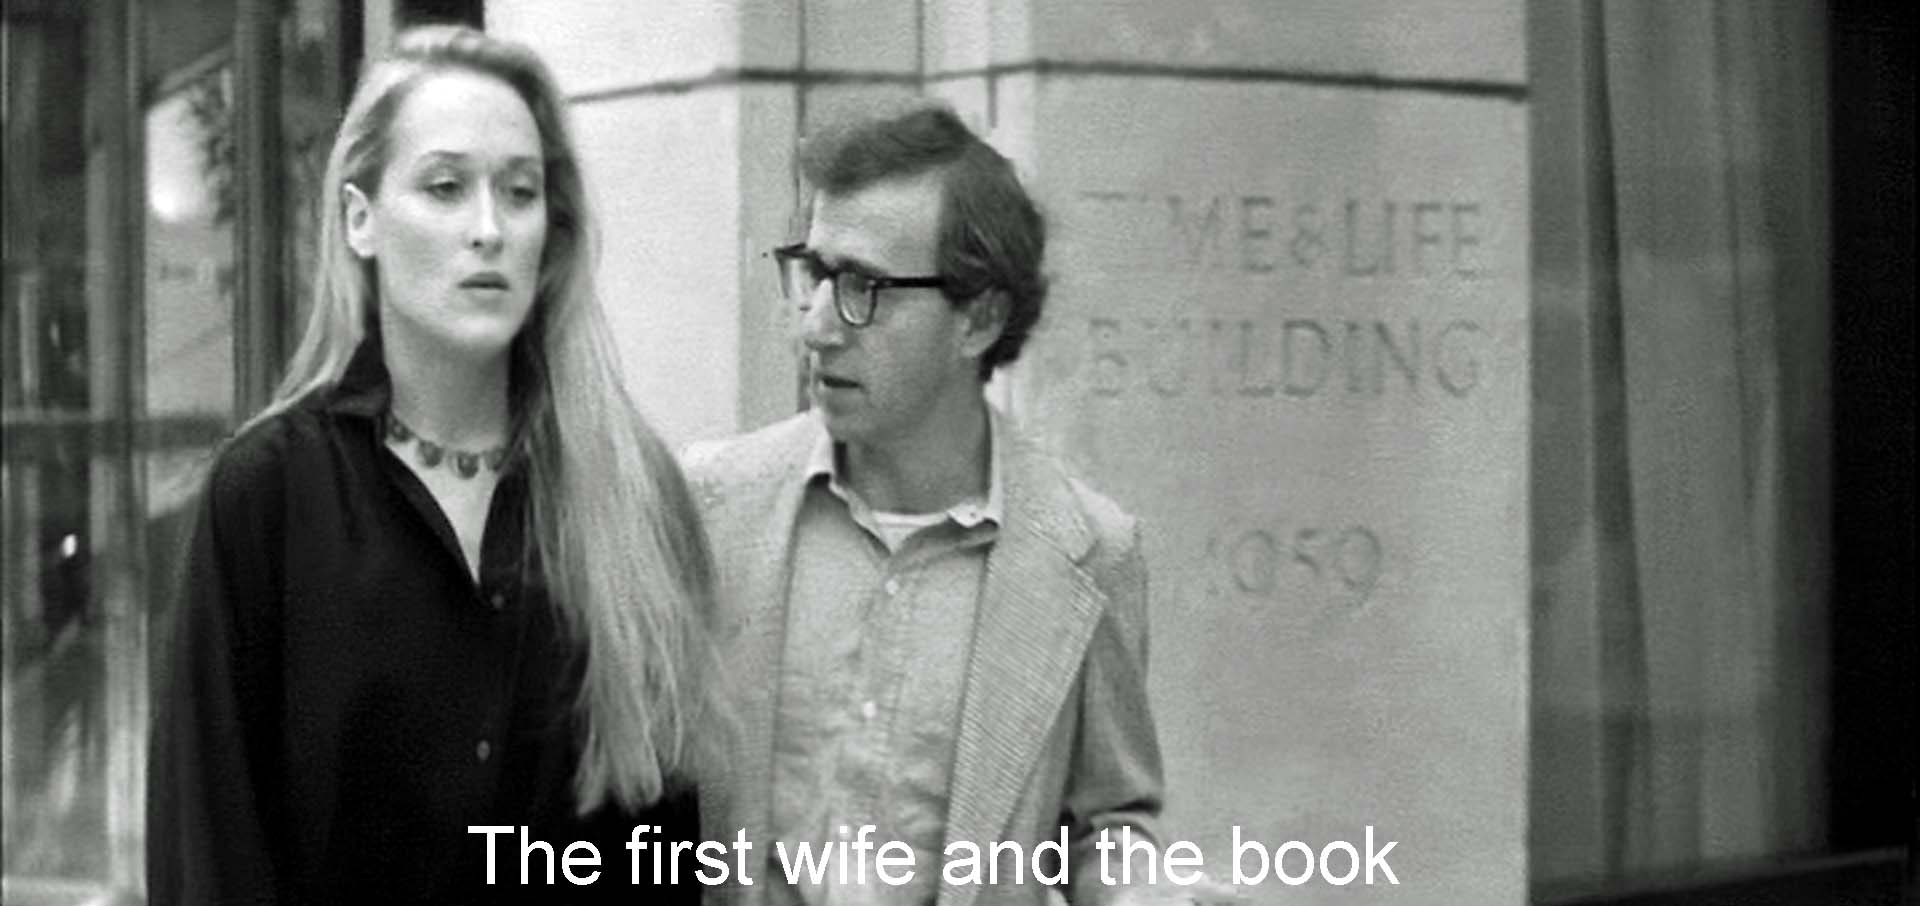 The first wife and the book